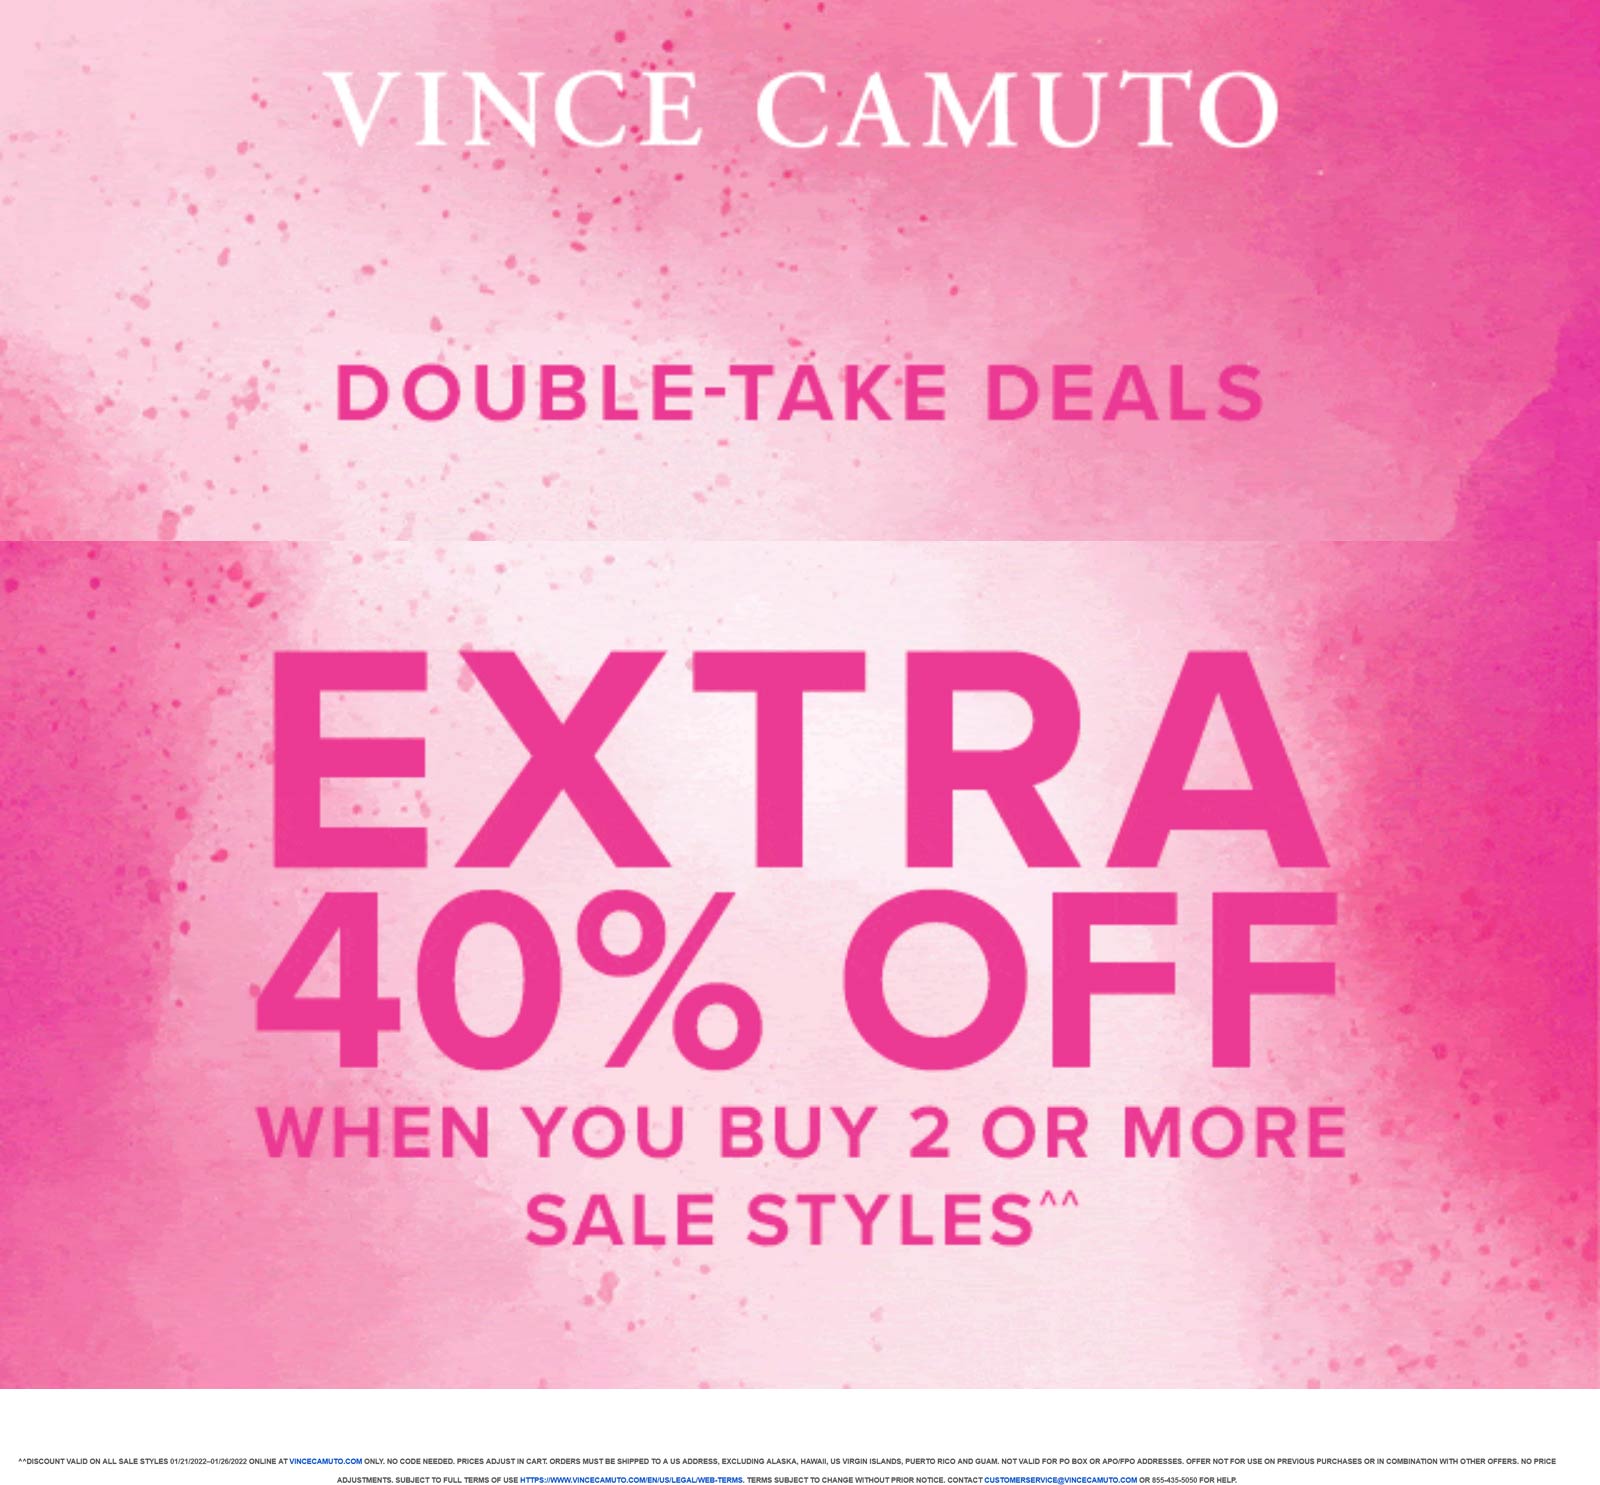 Vince Camuto stores Coupon  Extra 40% off all sale styles online at Vince Camuto #vincecamuto 